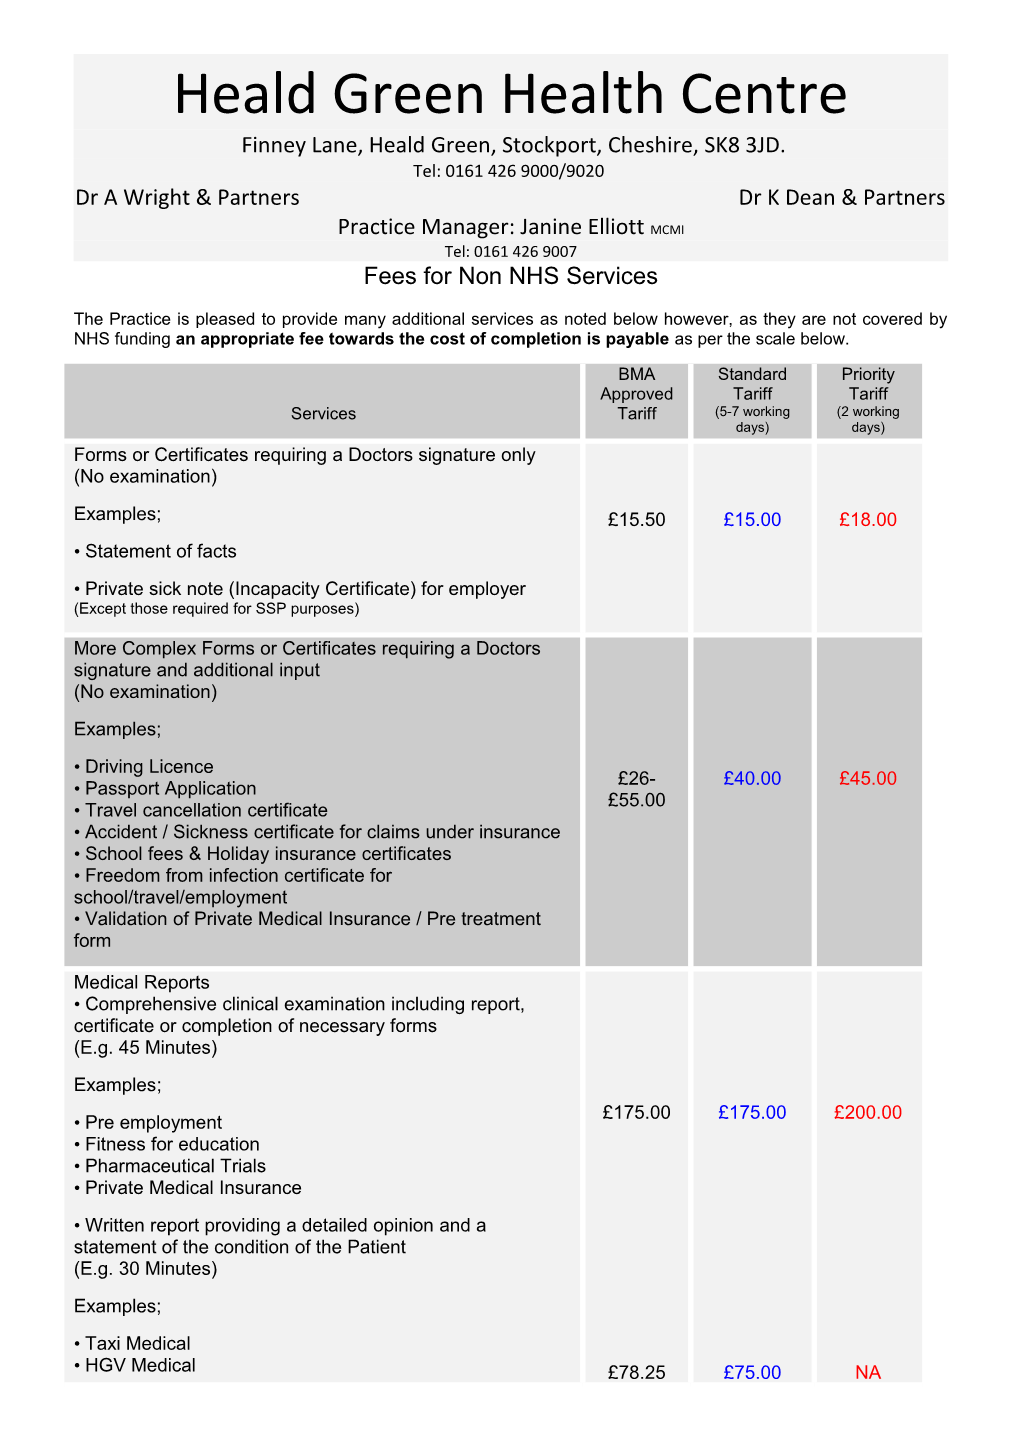 Fees for Non NHS Services s1